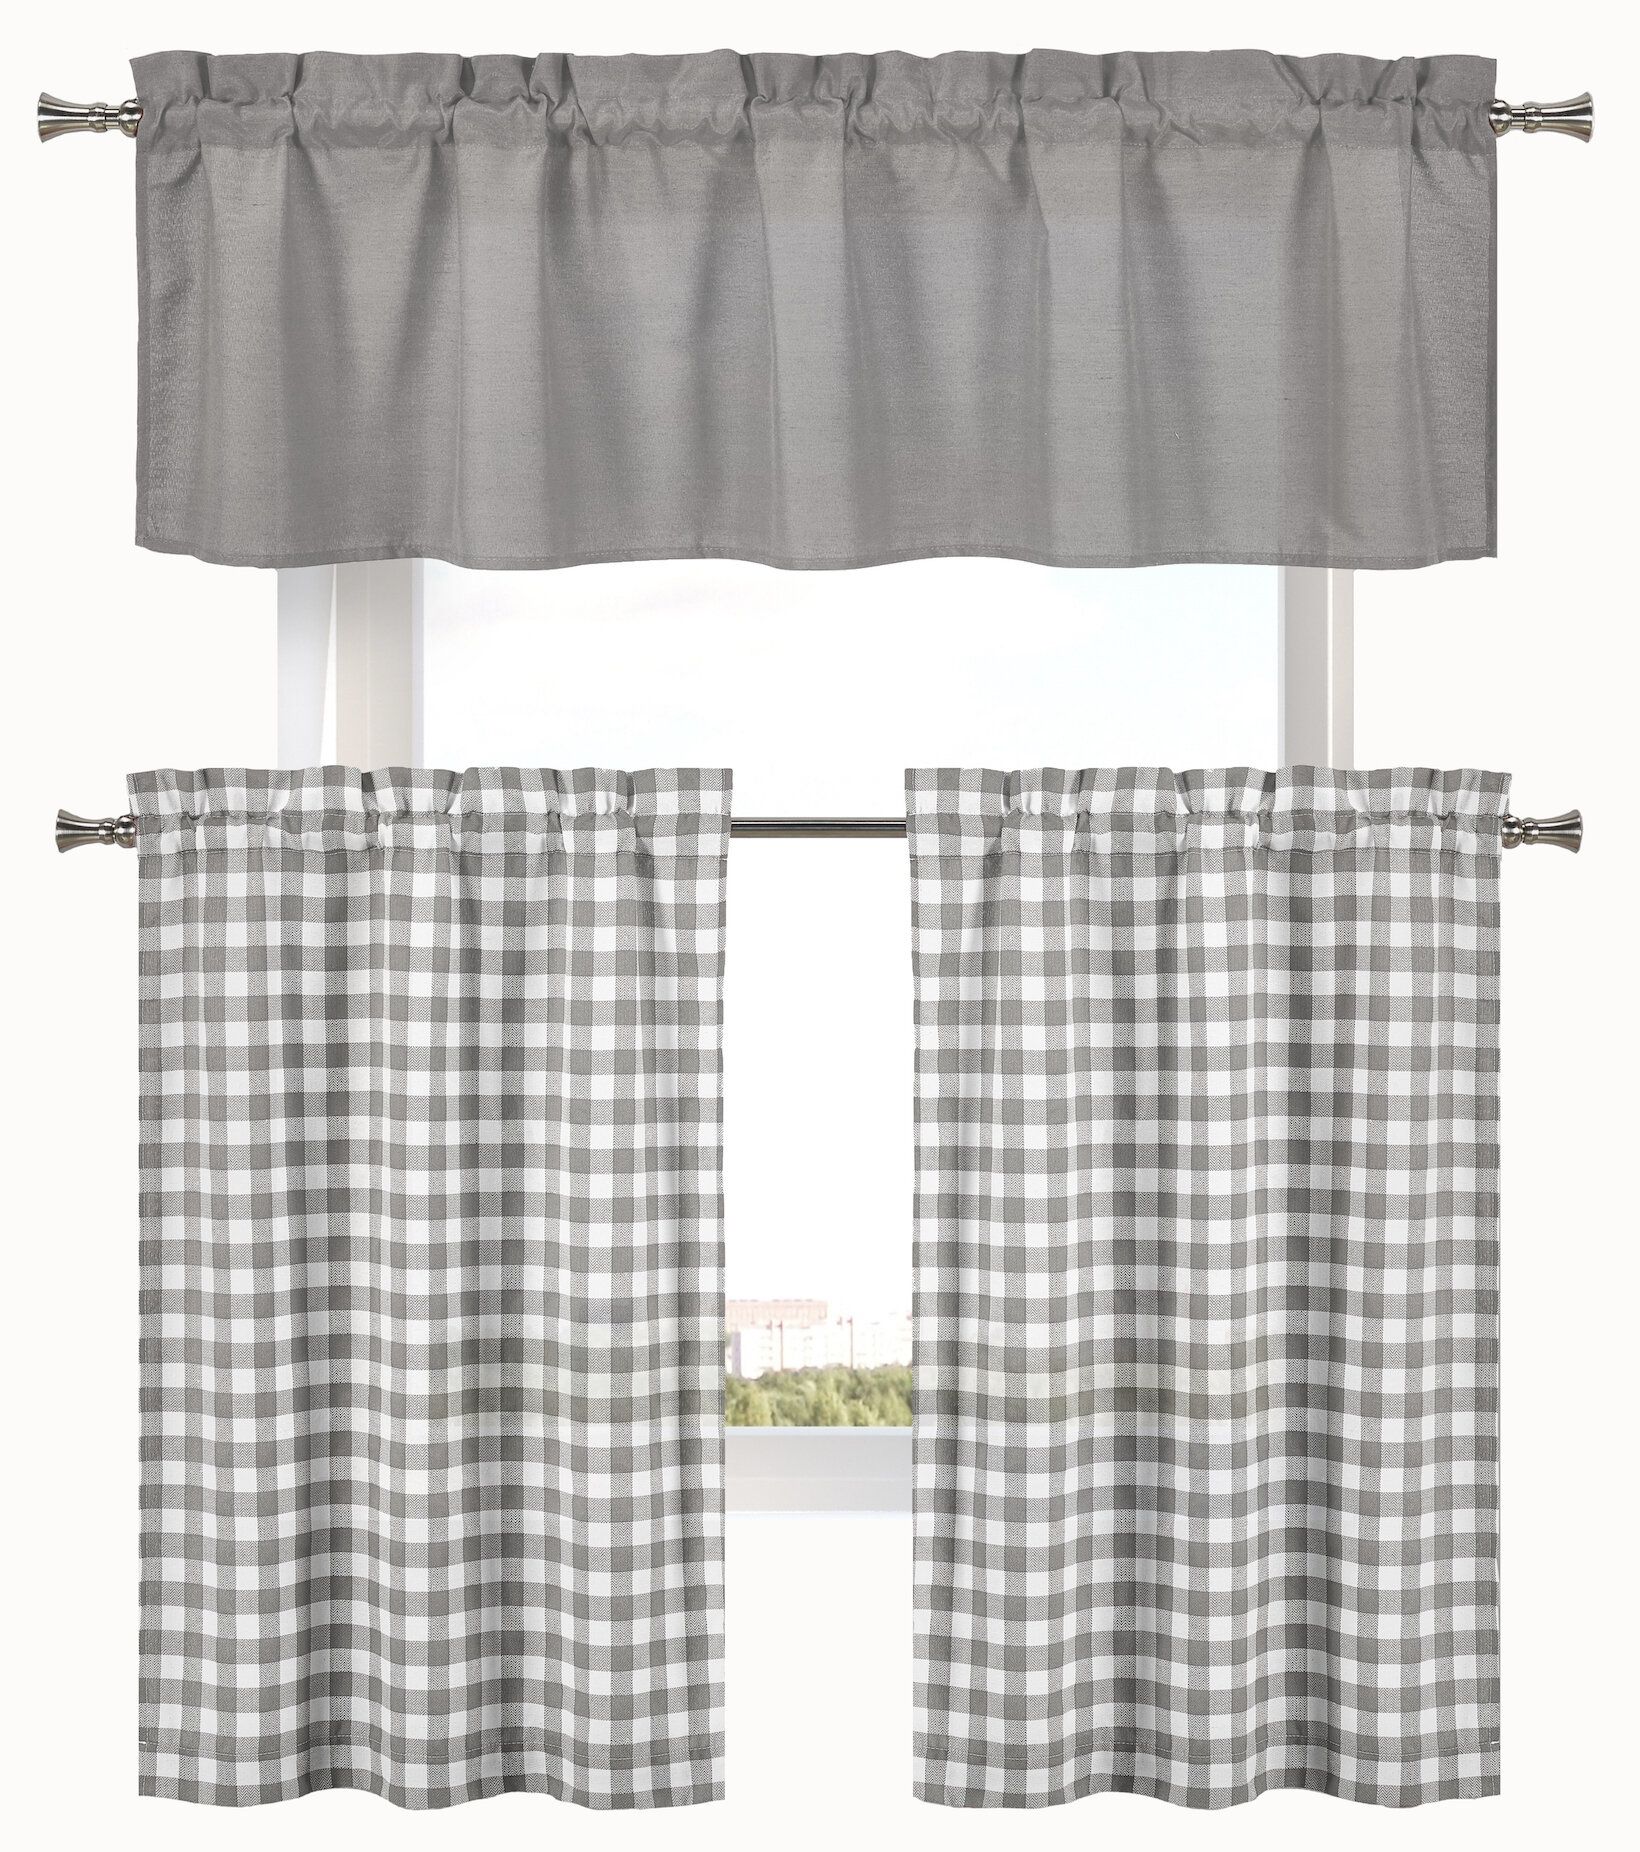 Cosima 3 Piece Complete Plaid Country 58" Kitchen Curtain Set Within Lodge Plaid 3 Piece Kitchen Curtain Tier And Valance Sets (View 5 of 20)